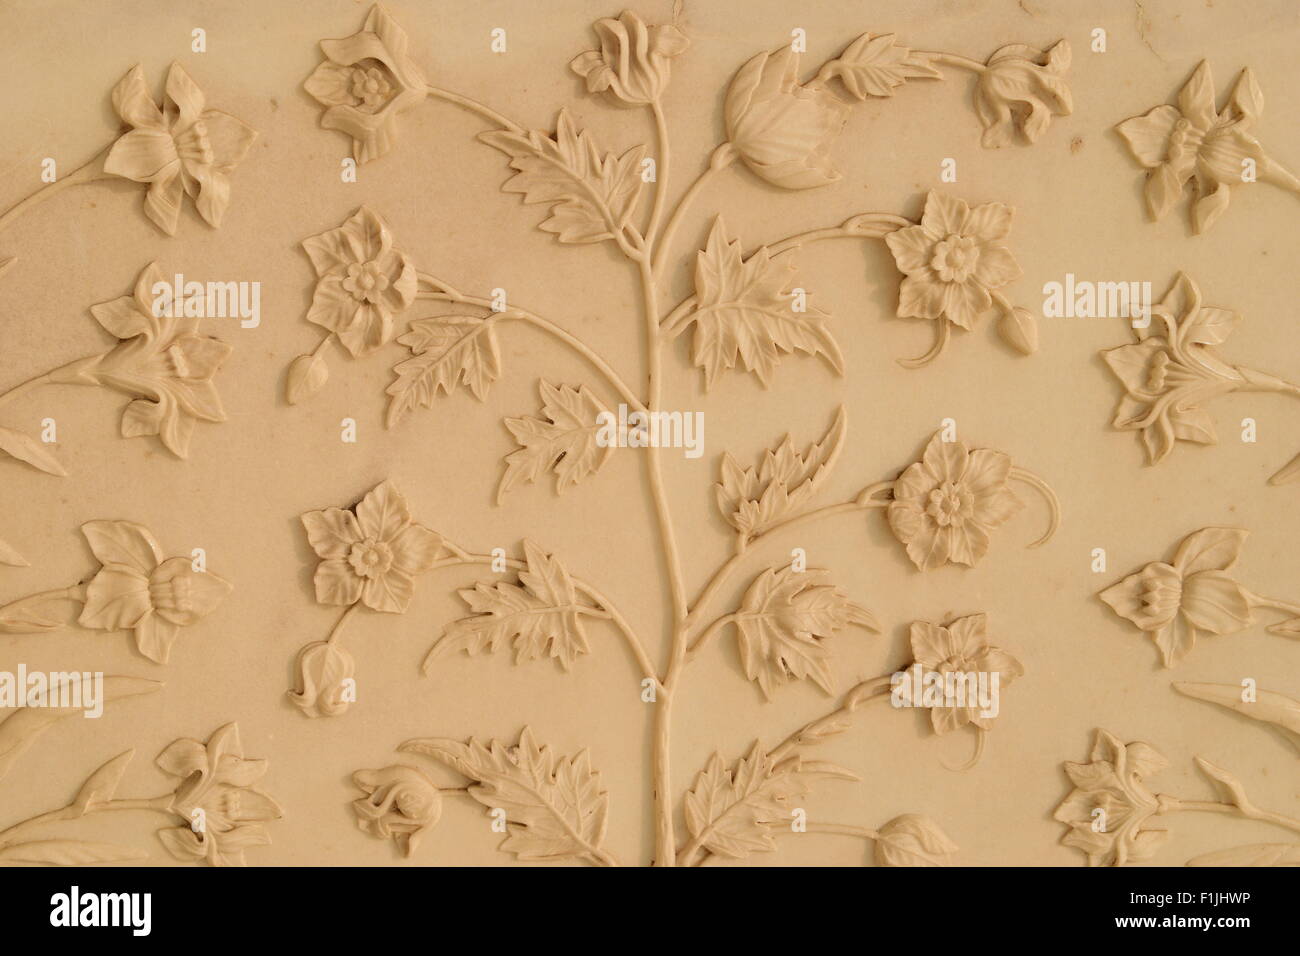 Flowers art design carved in Marble walls of Taj mahal Agra India ( world wonder Taj Mahal India ) Marble carving design floral pattern detail view Stock Photo